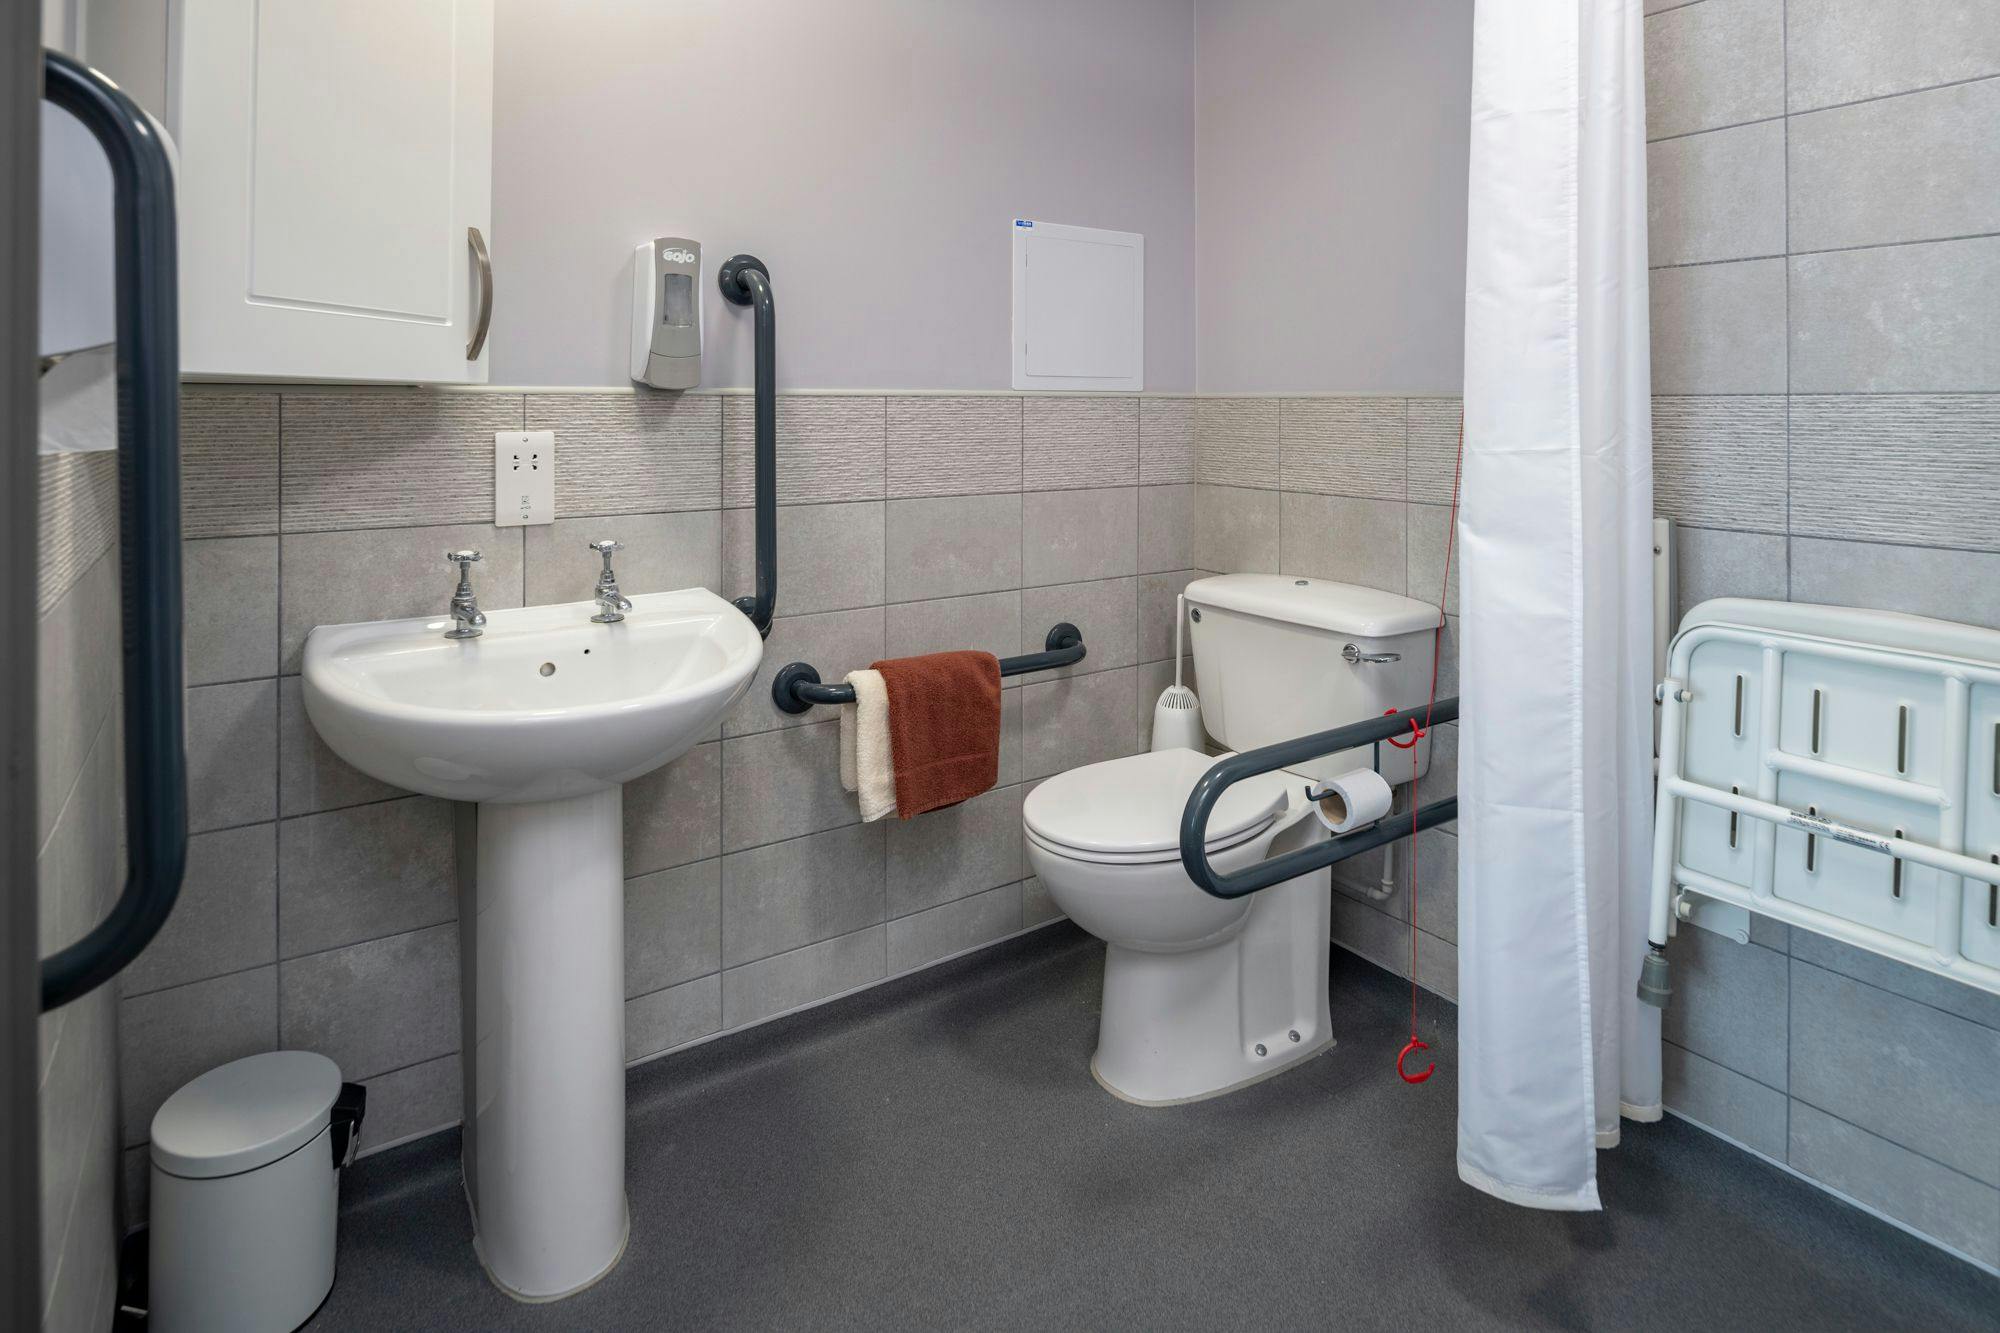 Bathroom at Grace Care Home in Thornbury, South Gloucestershire